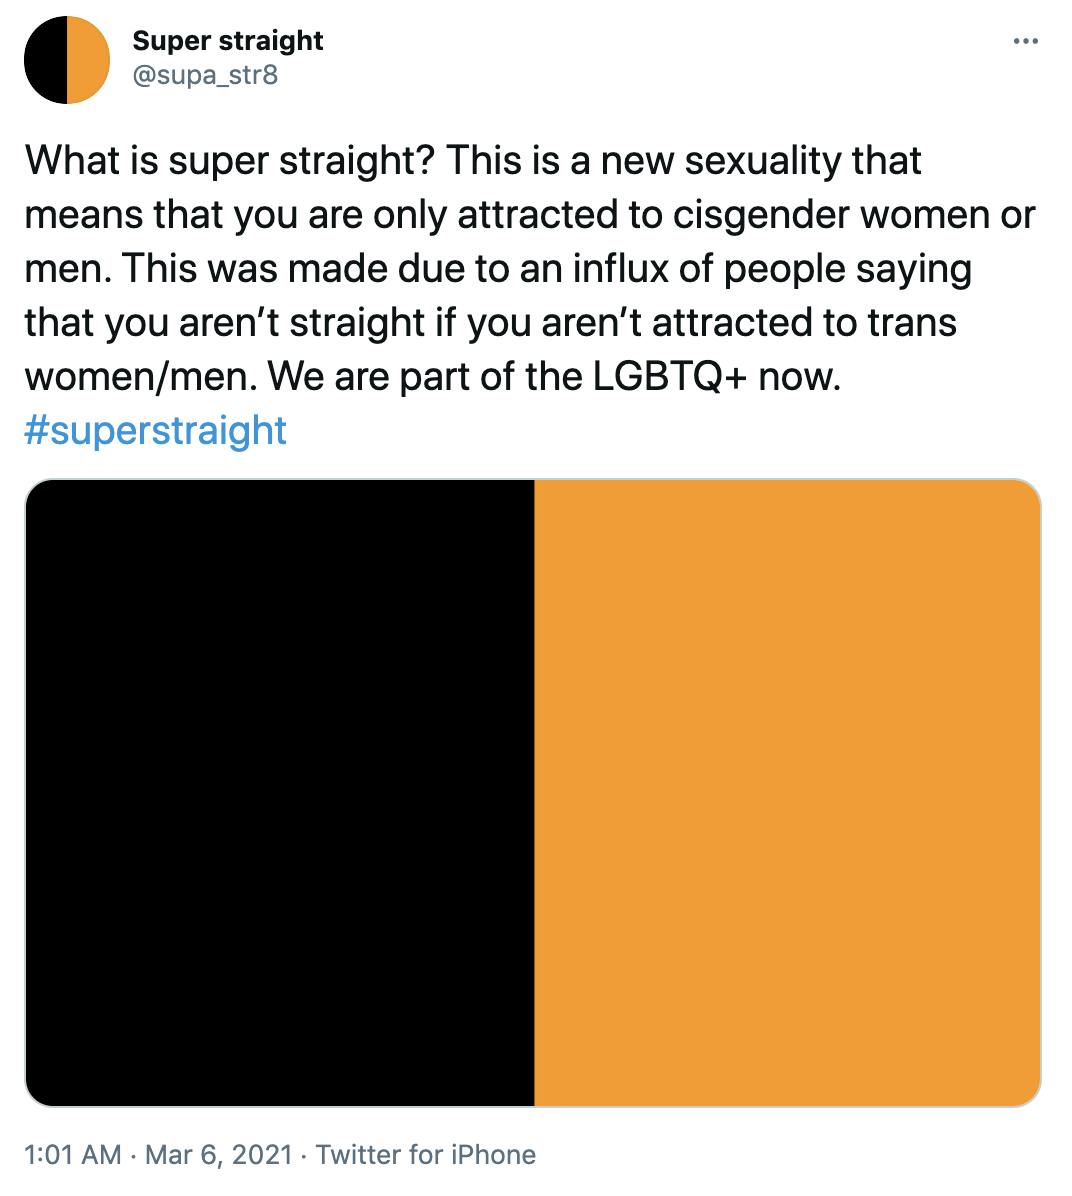 'What is super straight? This is a new sexuality that means that you are only attracted to cisgender women or men. This was made due to an influx of people saying that you aren’t straight if you aren’t attracted to trans women/men. We are part of the LGBTQ+ now. #superstraight' Black and orange flag